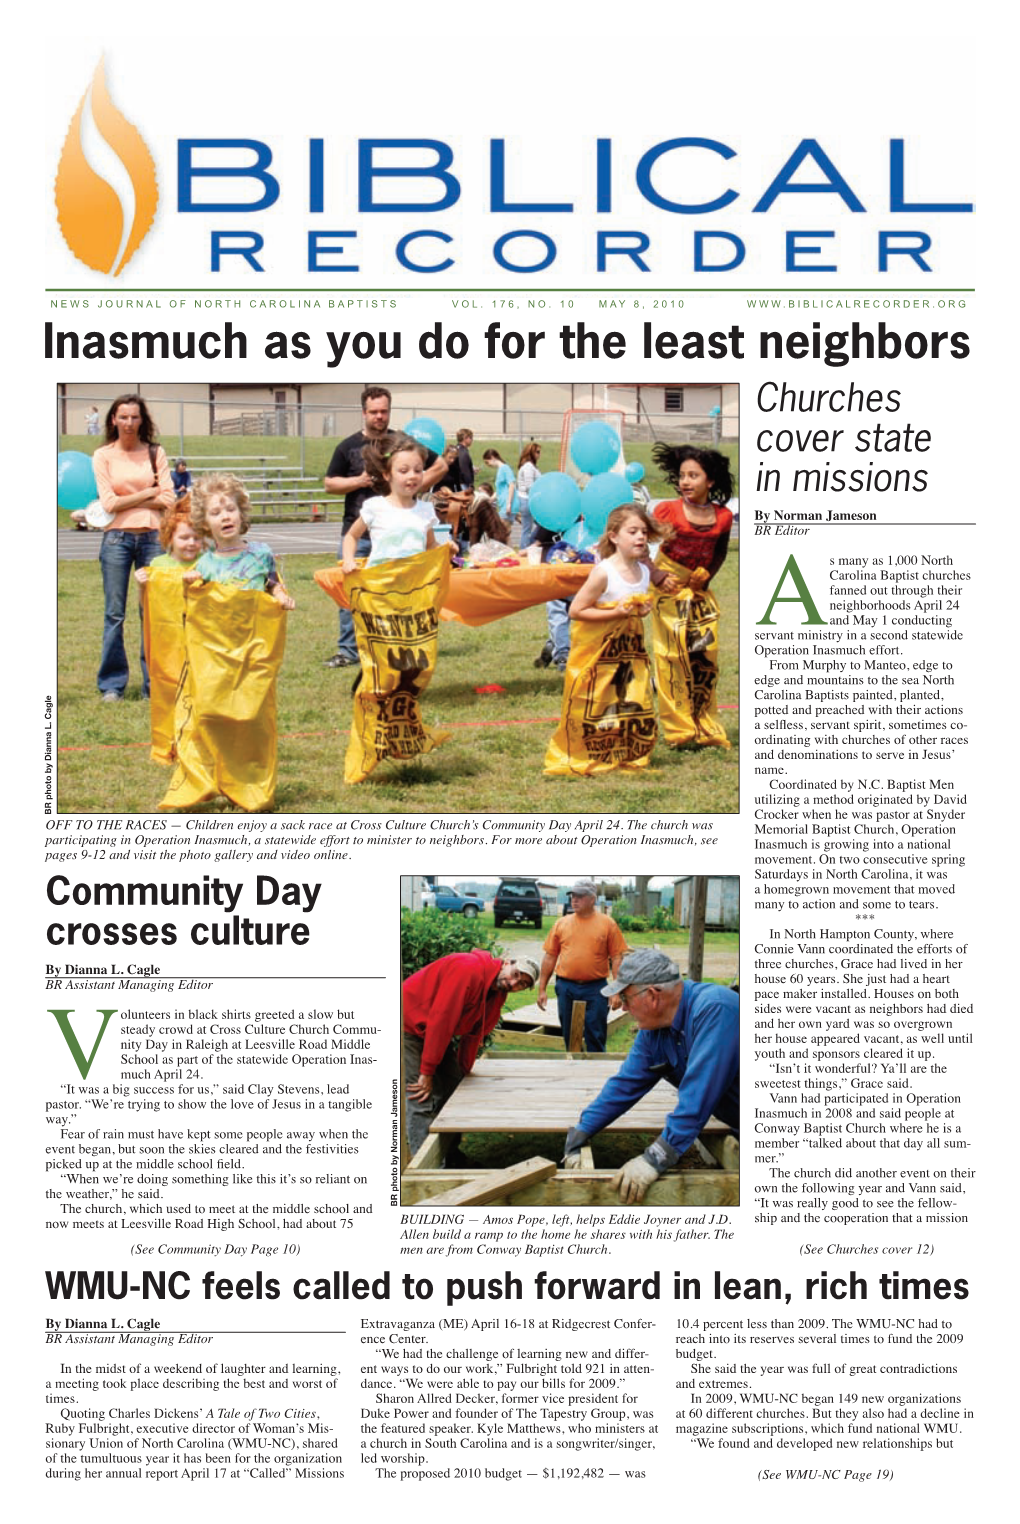 Inasmuch As You Do for the Least Neighbors Churches Cover State in Missions by Norman Jameson BR Editor